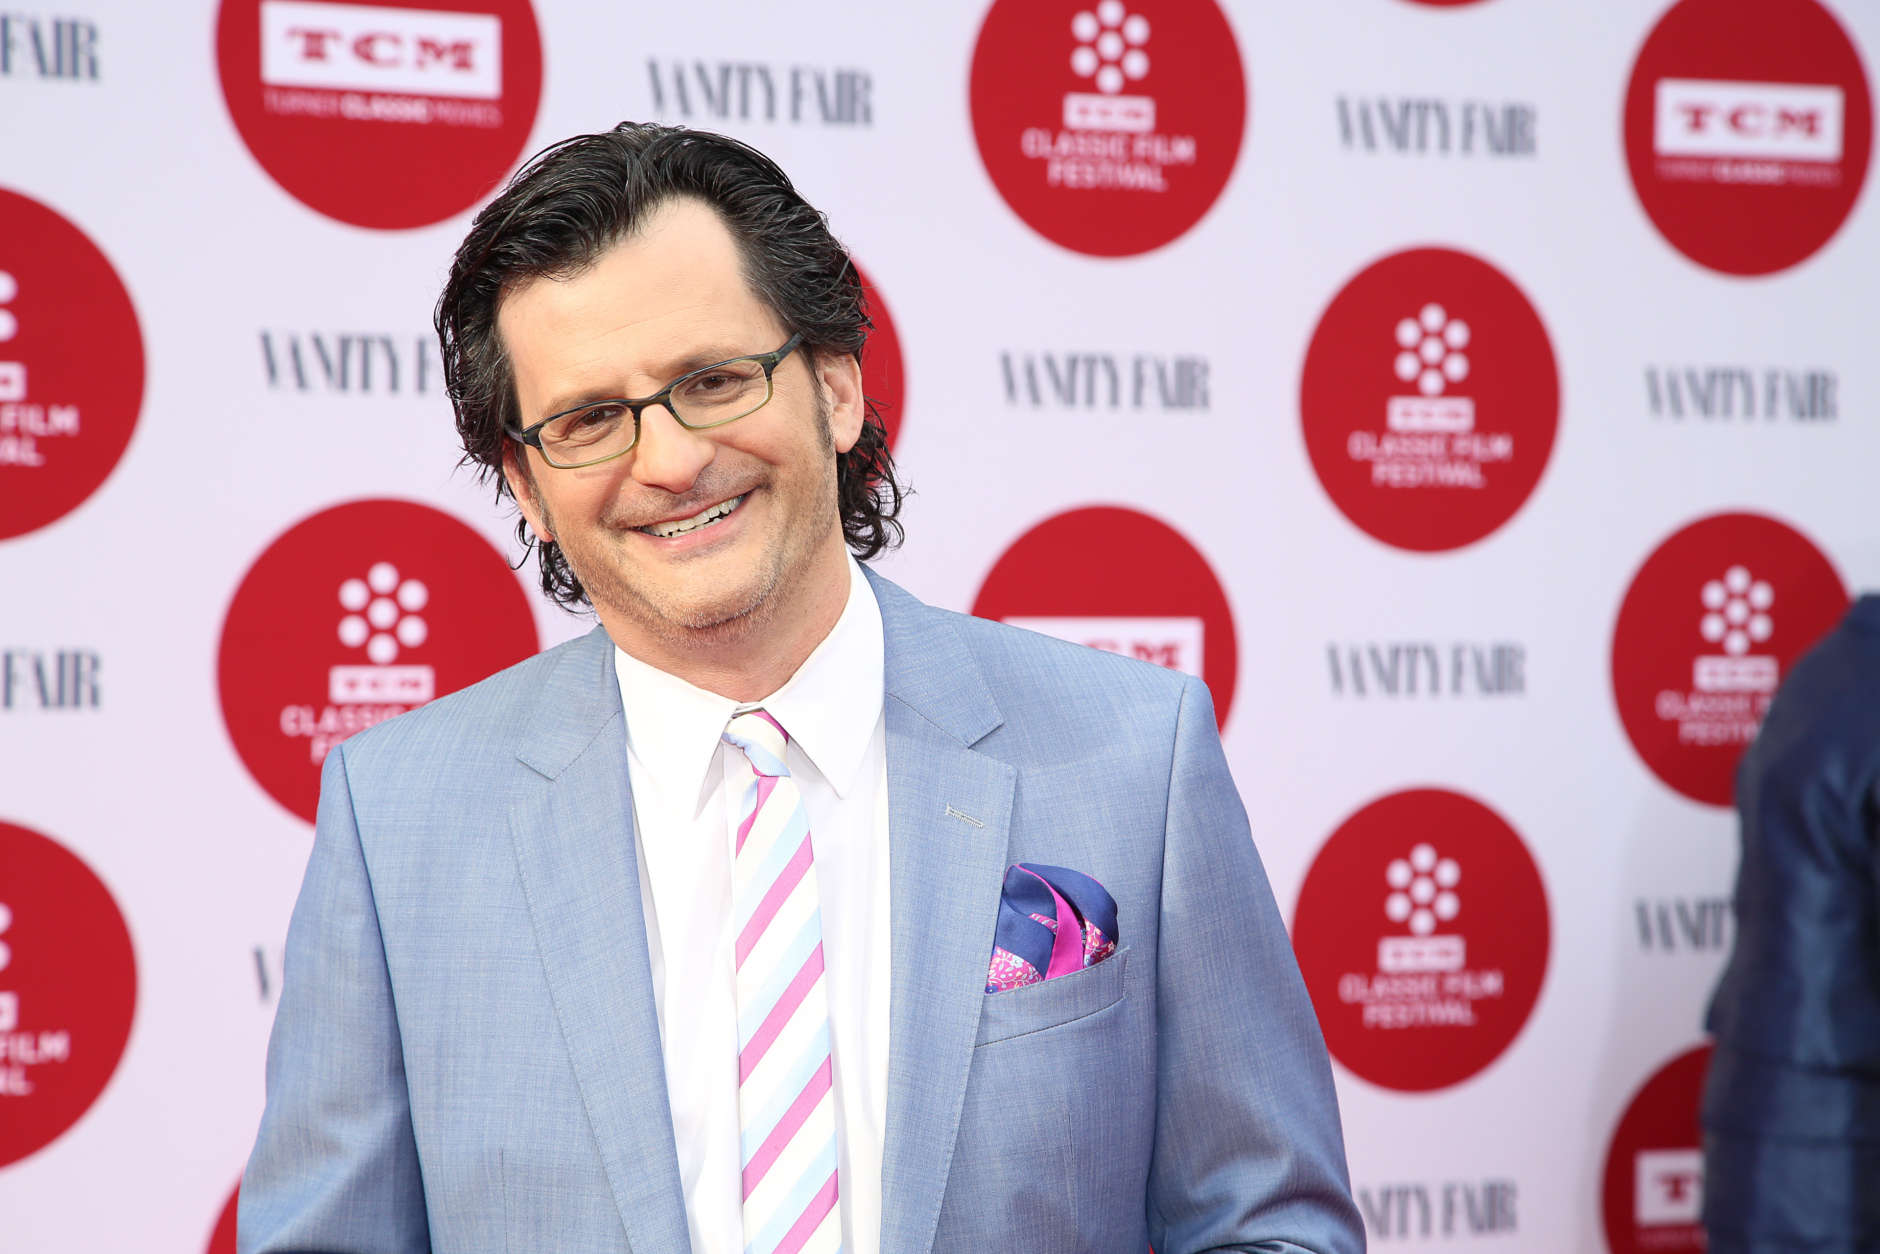 Ben Mankiewicz arrives at 2014 TCM Classic Film Festival's Opening Night Gala at the TCL Chinese Theatre on Thursday, April 10, 2014 in Los Angeles. (Photo by Annie I. Bang /Invision/AP)